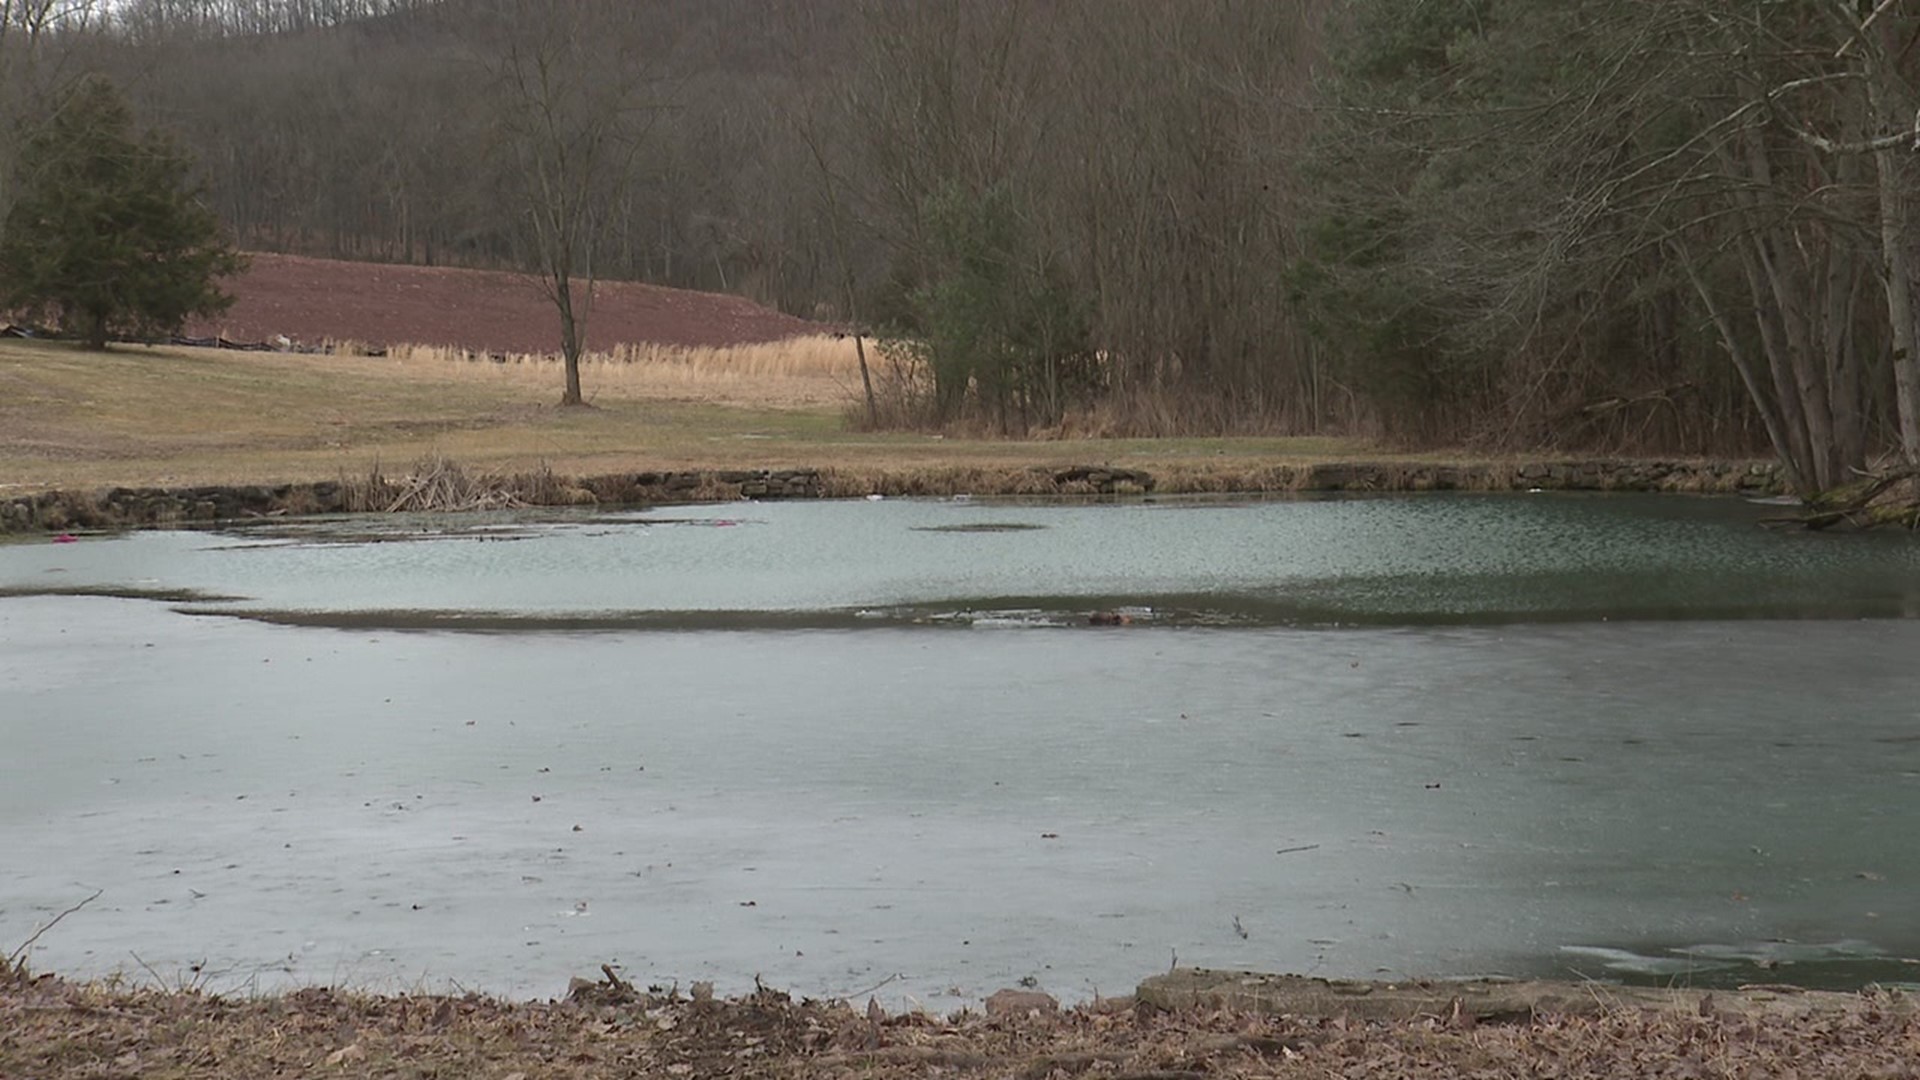 Two young boys fell into a pond near Orwigsburg on Wednesday. One boy did not survive.